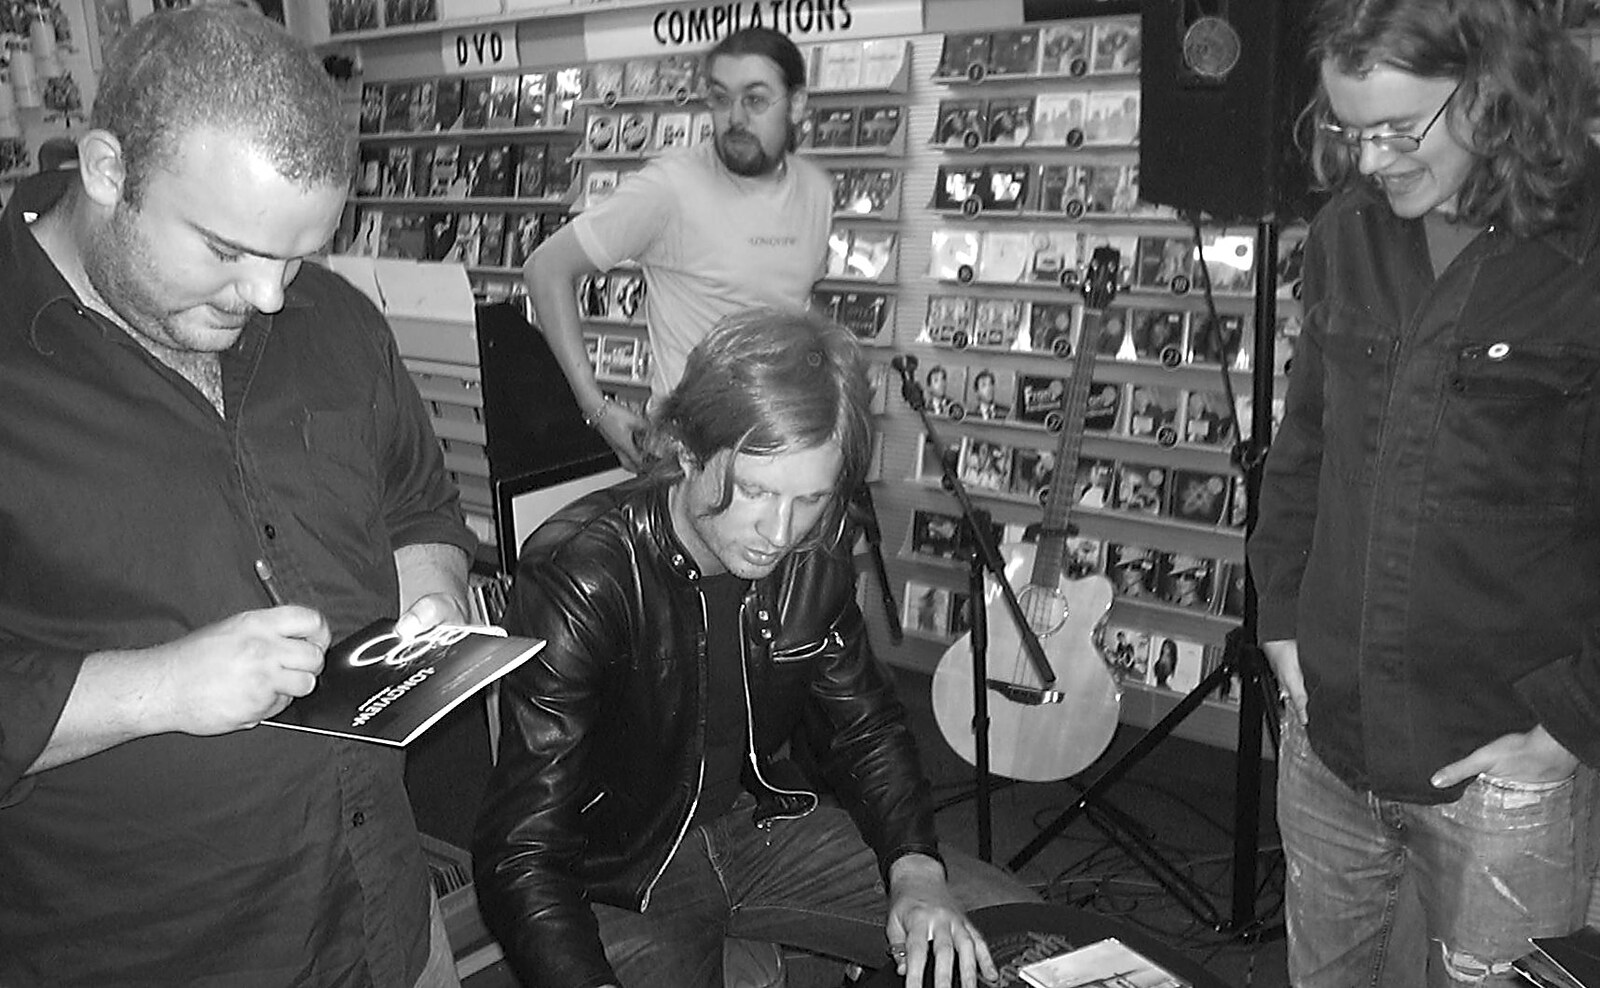 More signing from Longview play Revolution Records, Diss, Norfolk - 2nd July 2004